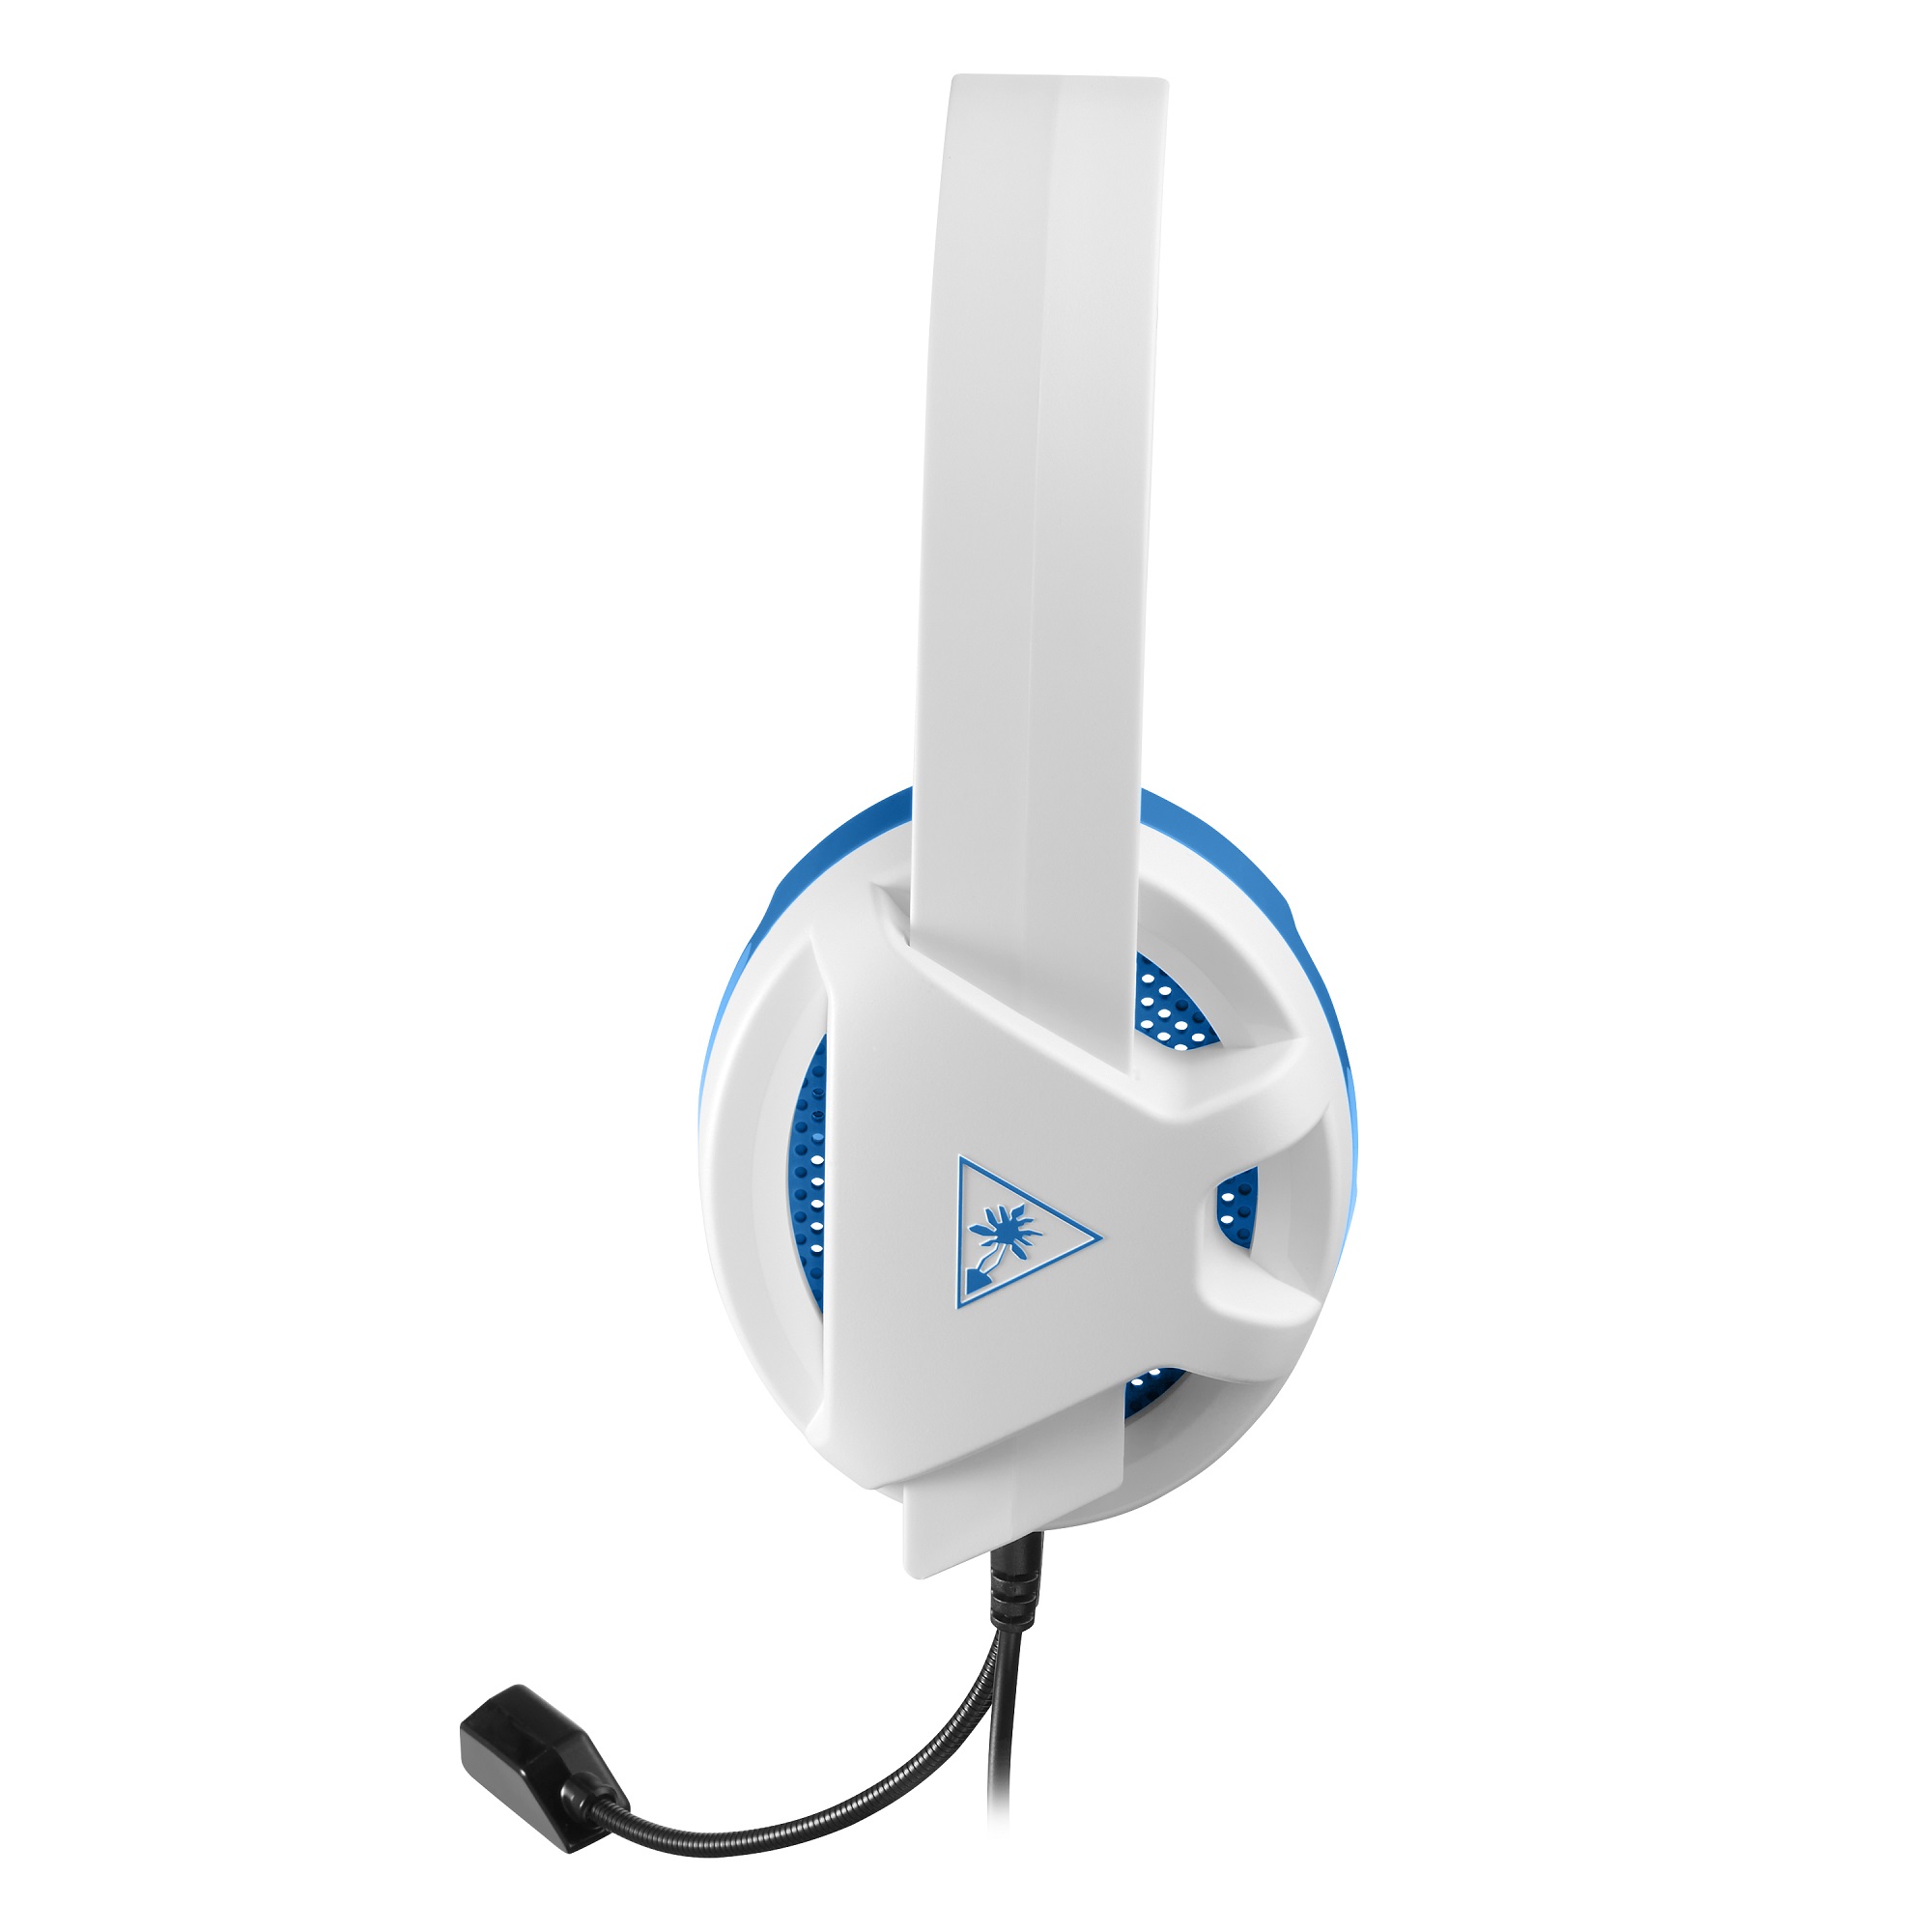 Turtle Beach Recon Chat Headset for PS4, Xbox One, PC, Mobile (White) - image 2 of 5